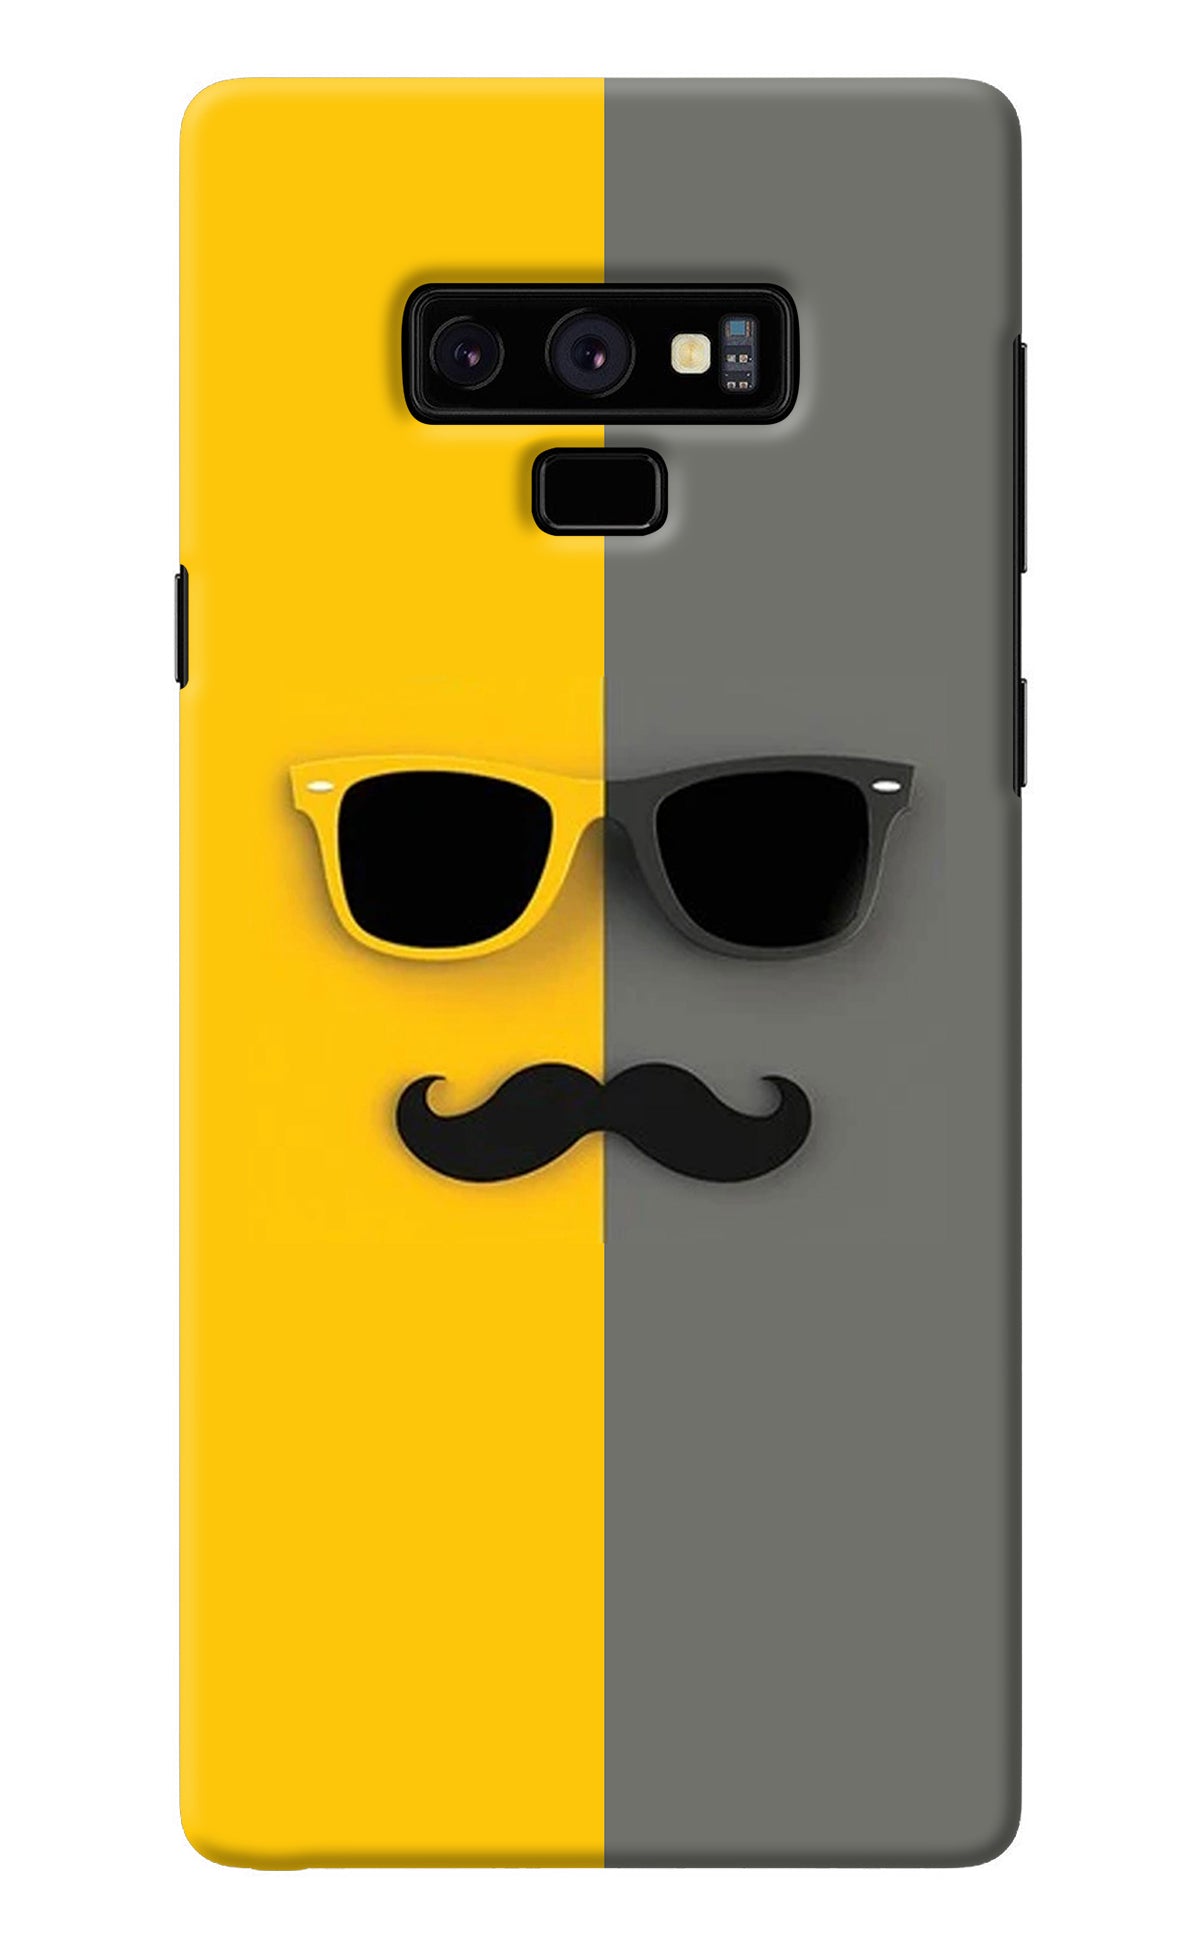 Sunglasses with Mustache Samsung Note 9 Back Cover